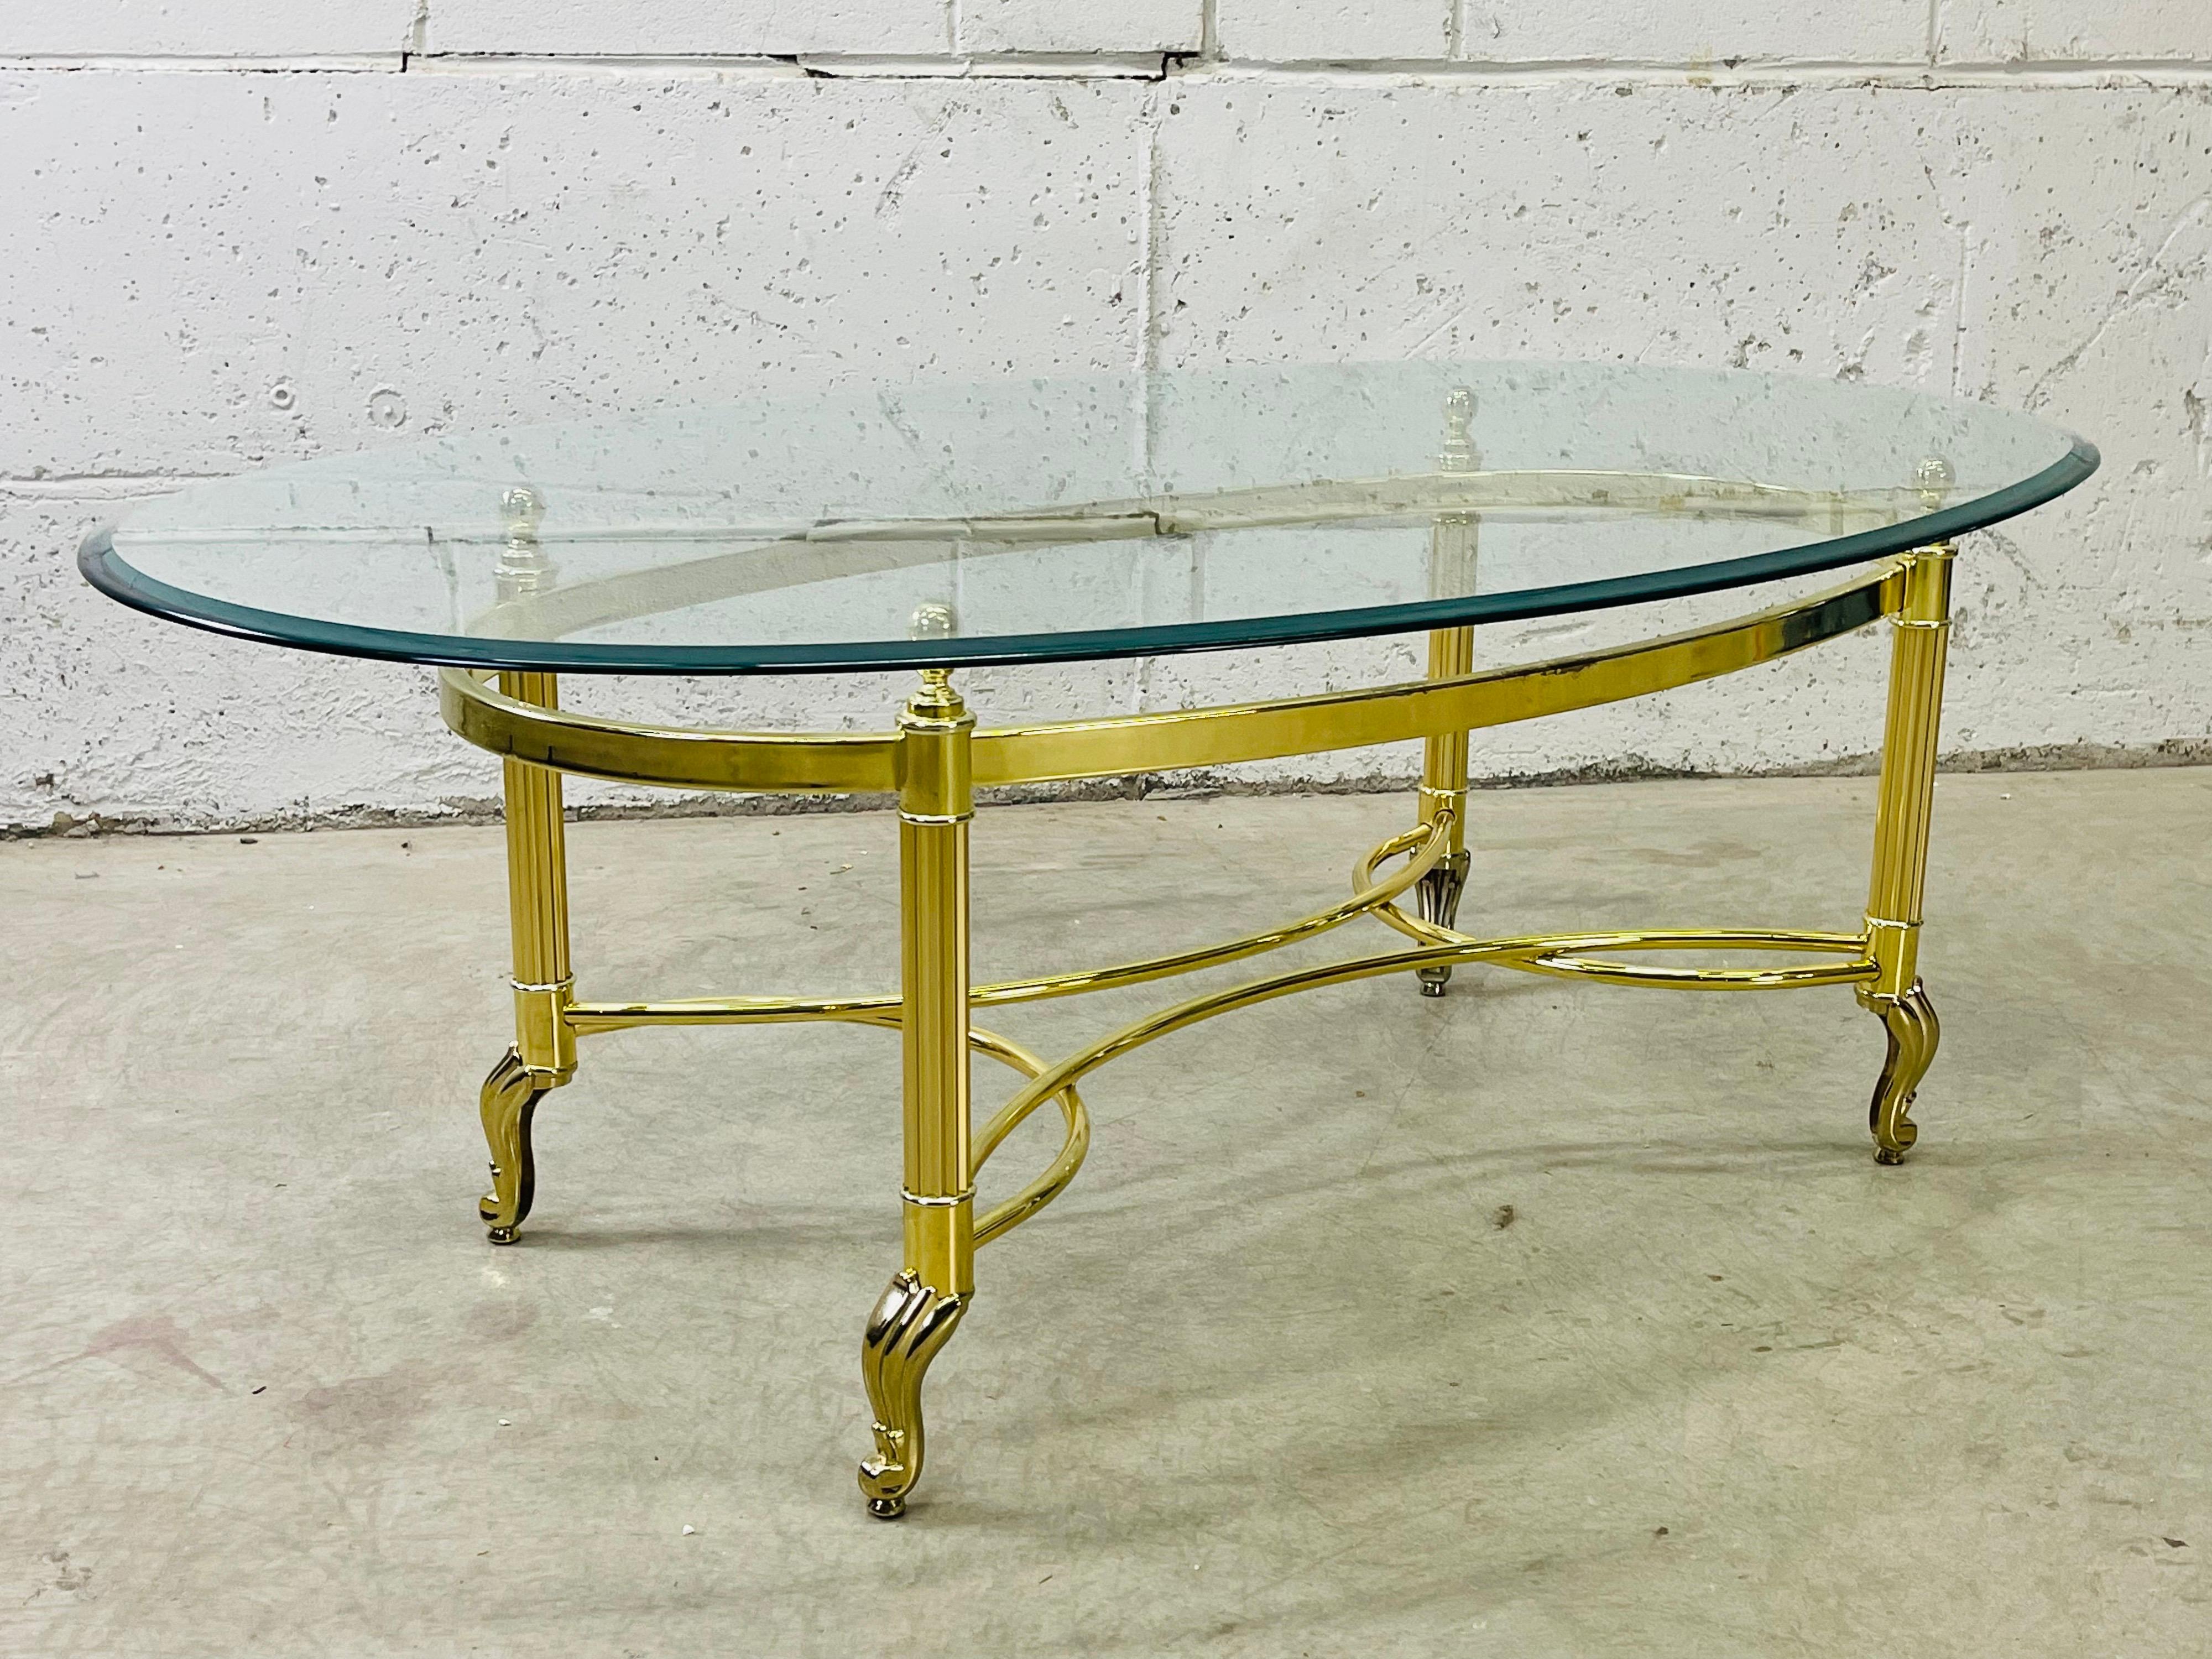 Vintage 1960s Le Barge style oval glass top and gilt metal base coffee table. The glass top is beveled along the edges. Very good used condition. No marks.